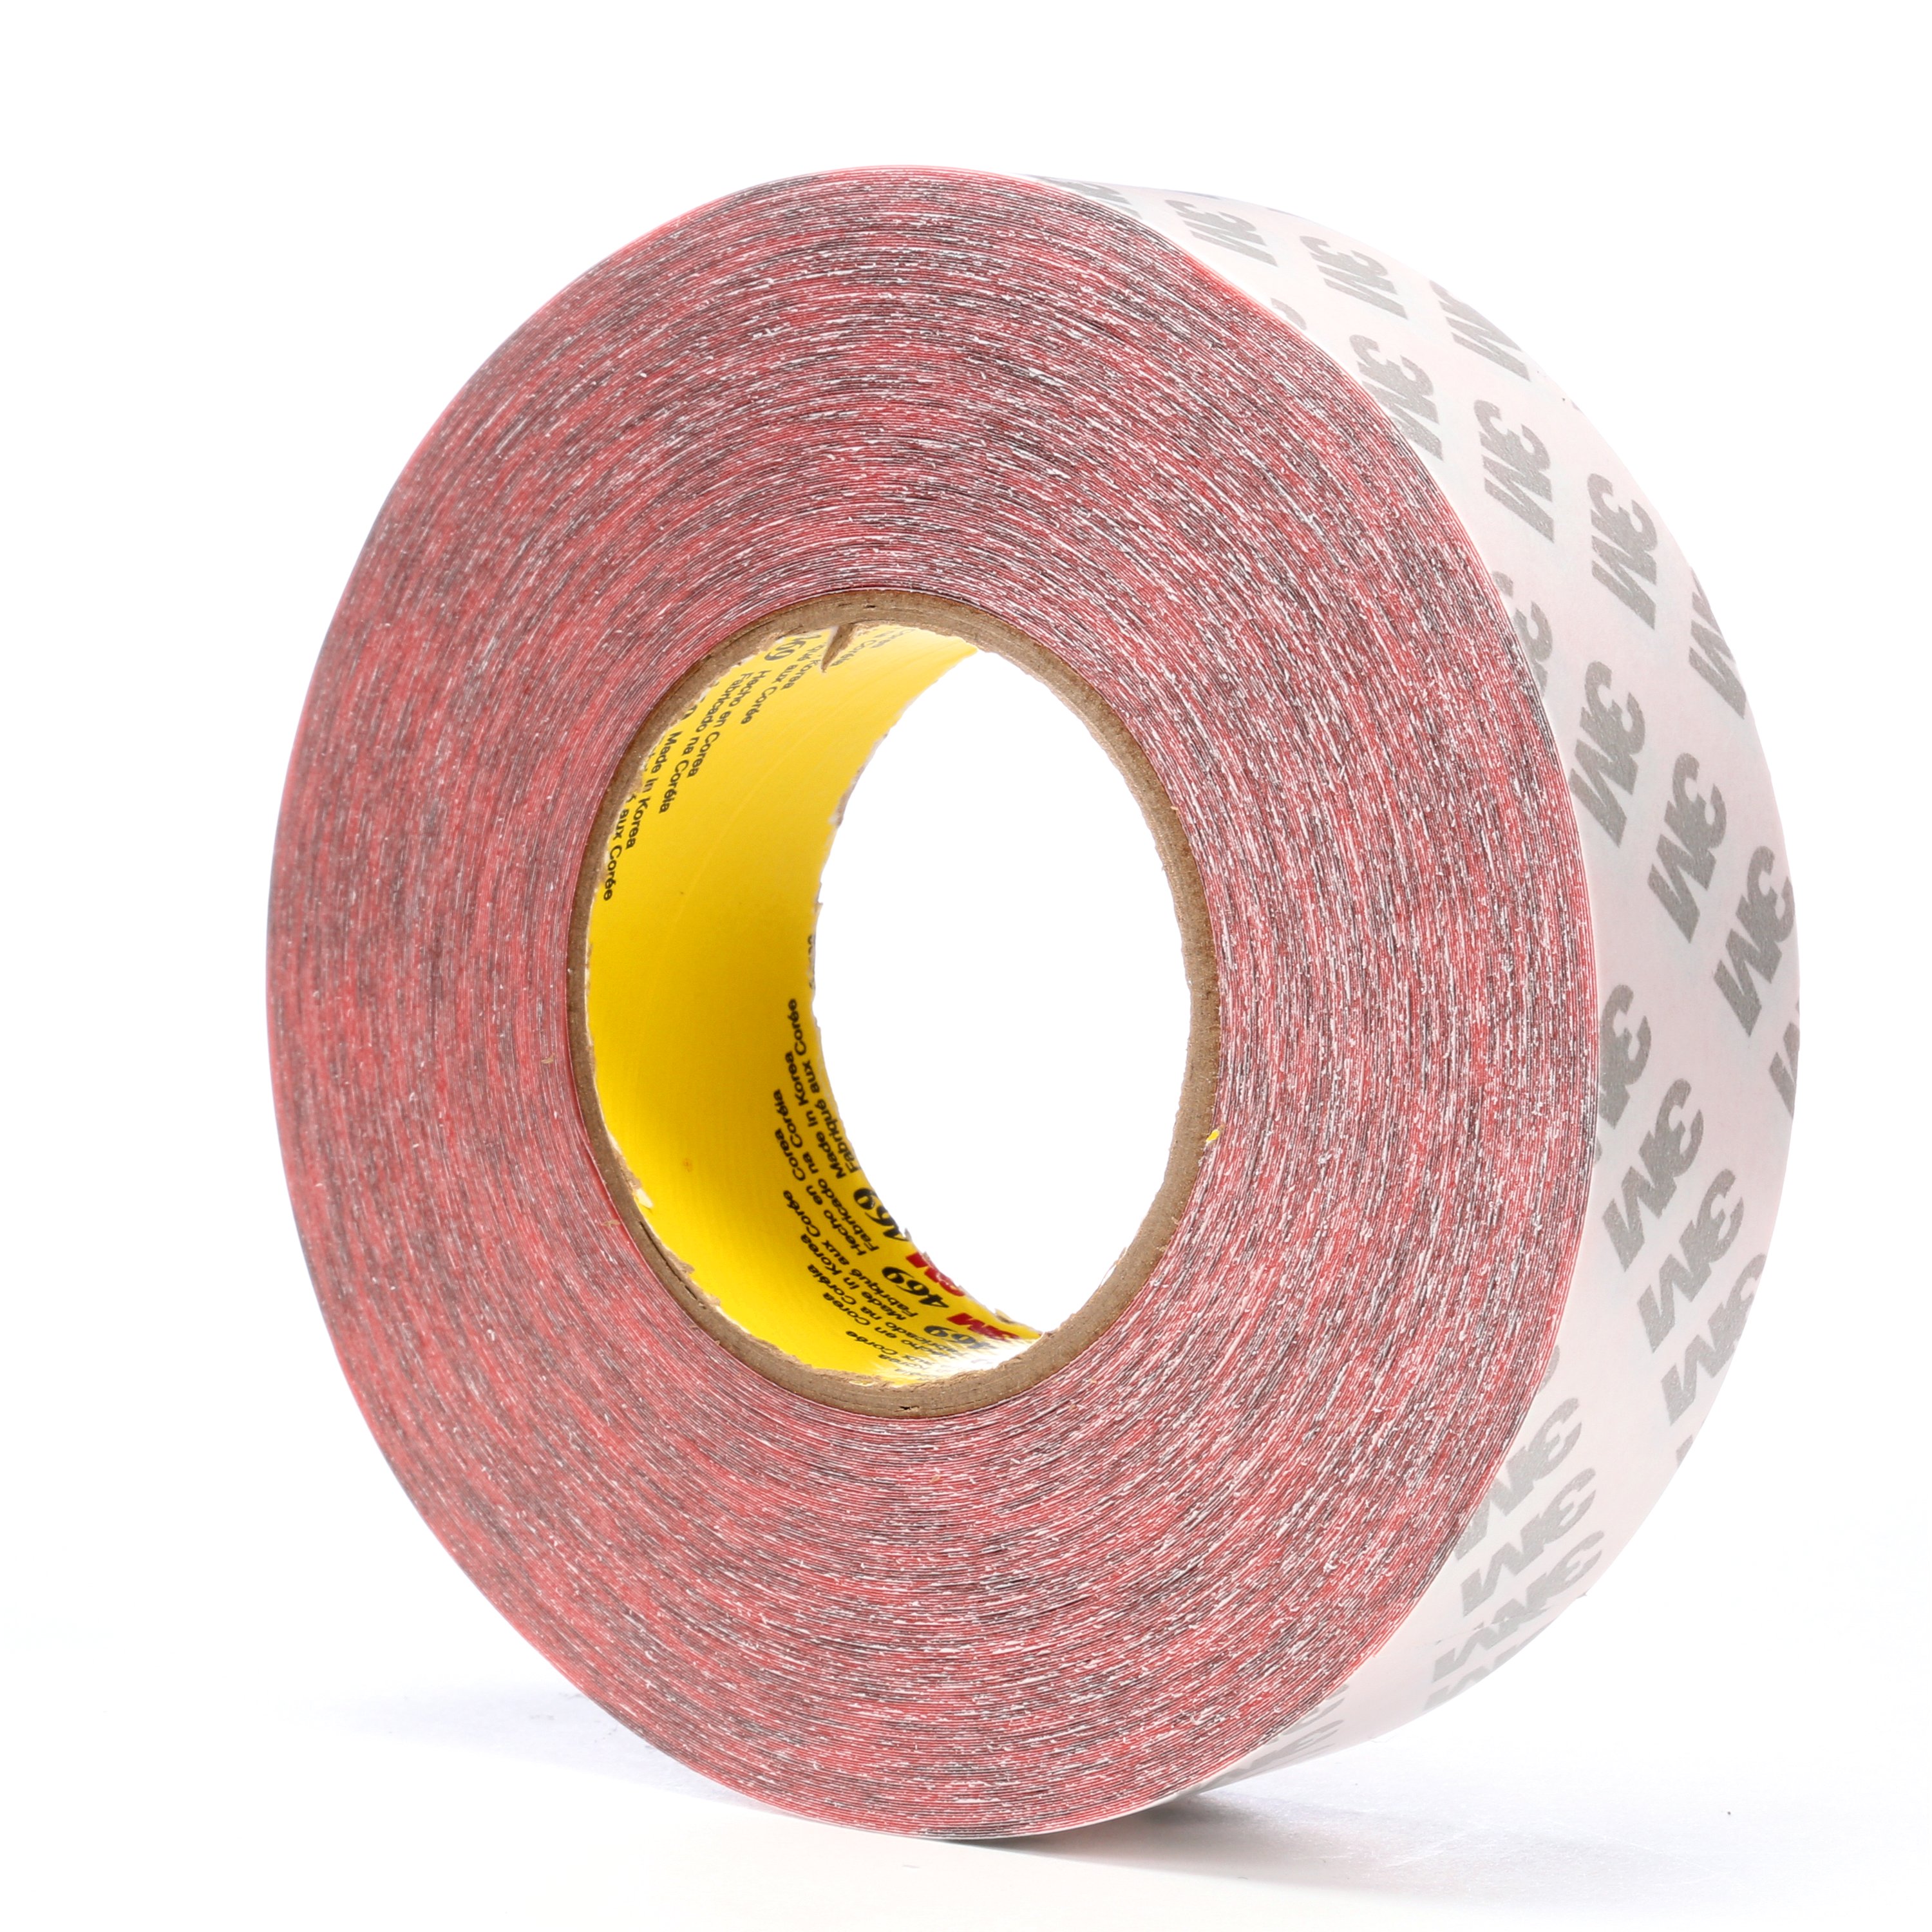 3M 469 Red Double Coated Double Sided Tape, 2 Wide x 60 Yard Roll